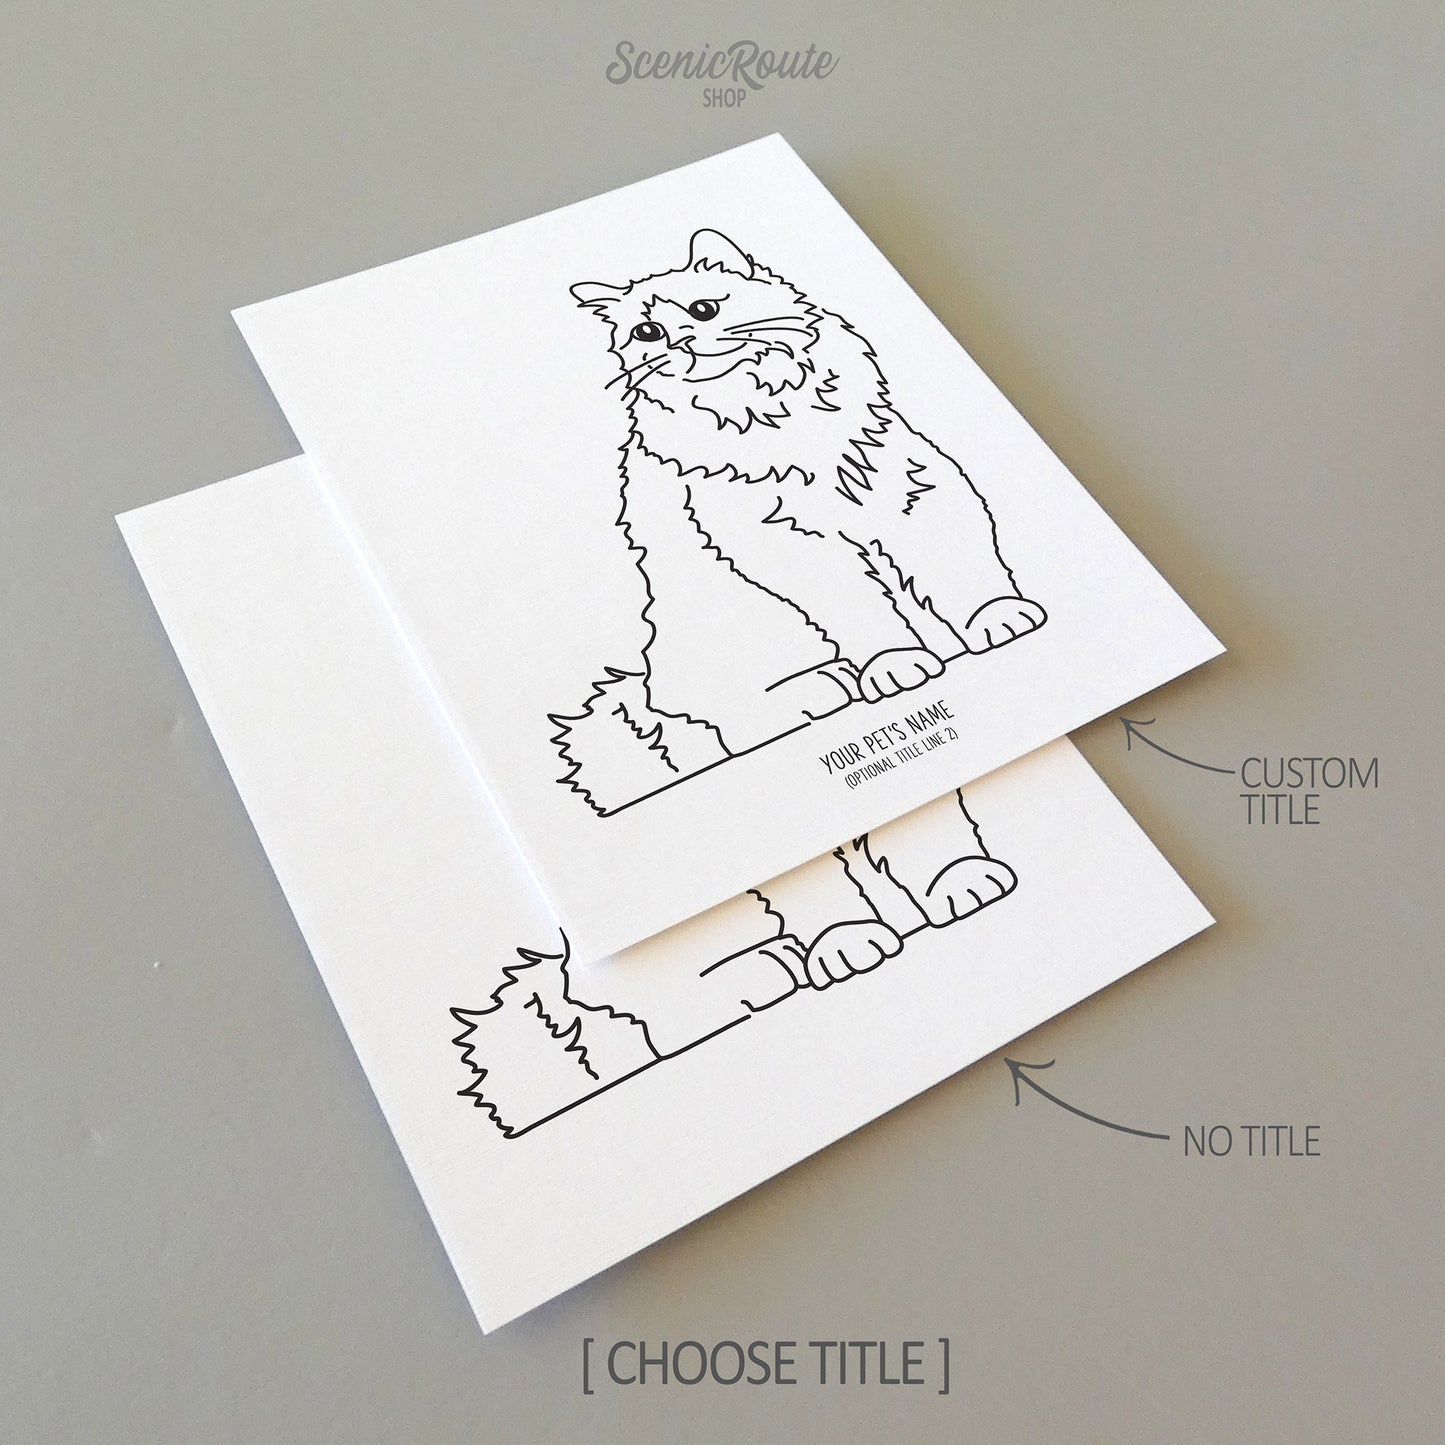 Two line art drawings of a Birman Cat on white linen paper with a gray background.  The pieces are shown with “No Title” and “Custom Title” options for the available art print options.